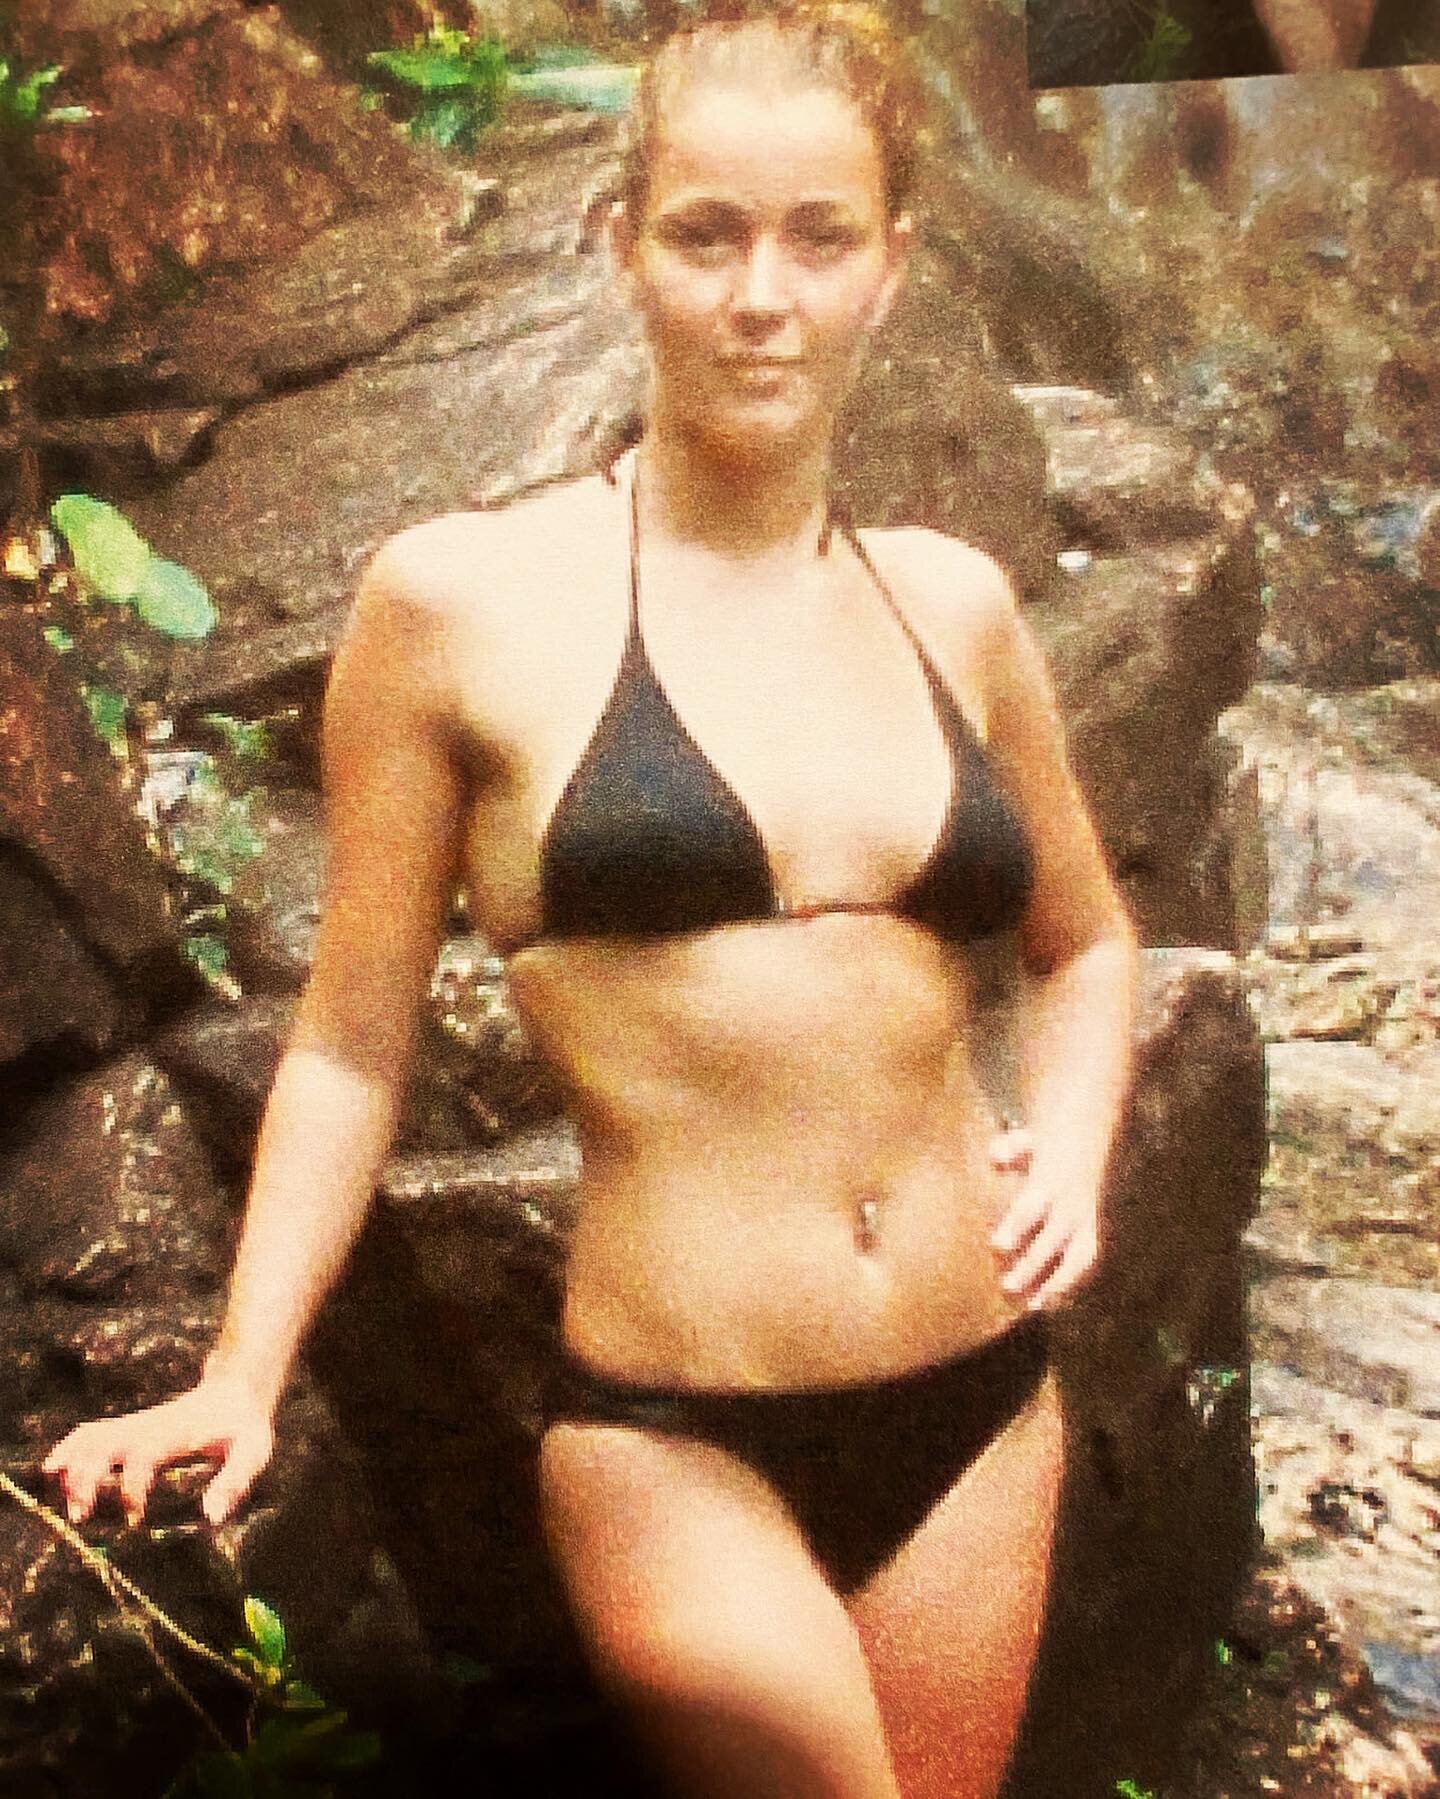 #tbt 
🏝 Dreaming of the days we can travel again, go on wild adventures, climb waterfalls, find secluded beaches and chill-out hippy style. 
.
This photo was taken, living the dream, on one of my global travels in 2005, climbing a waterfall and swim